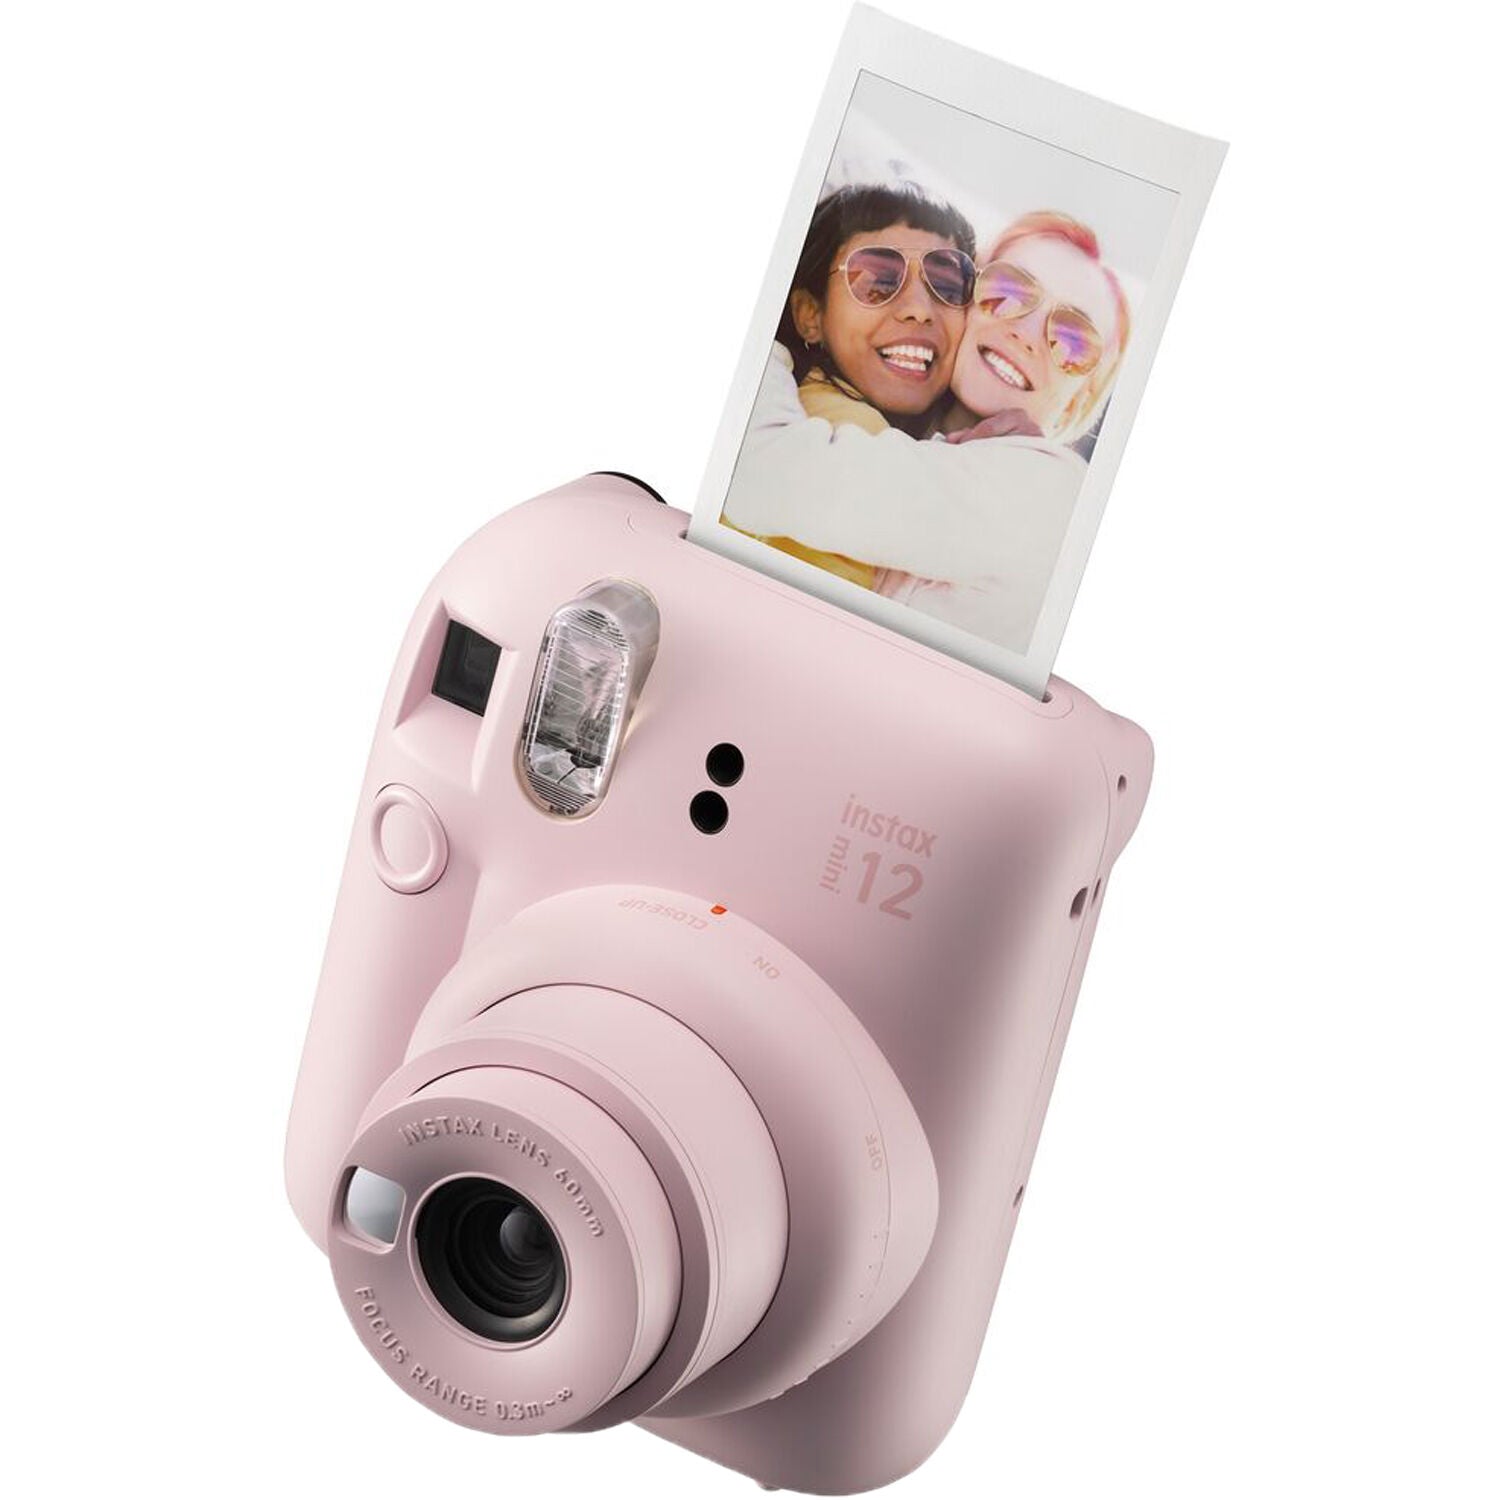 FUJIFILM INSTAX Mini 12 Instant Film Camera with pink shell bag and 20 Shots Instant film (Blossom Pink)